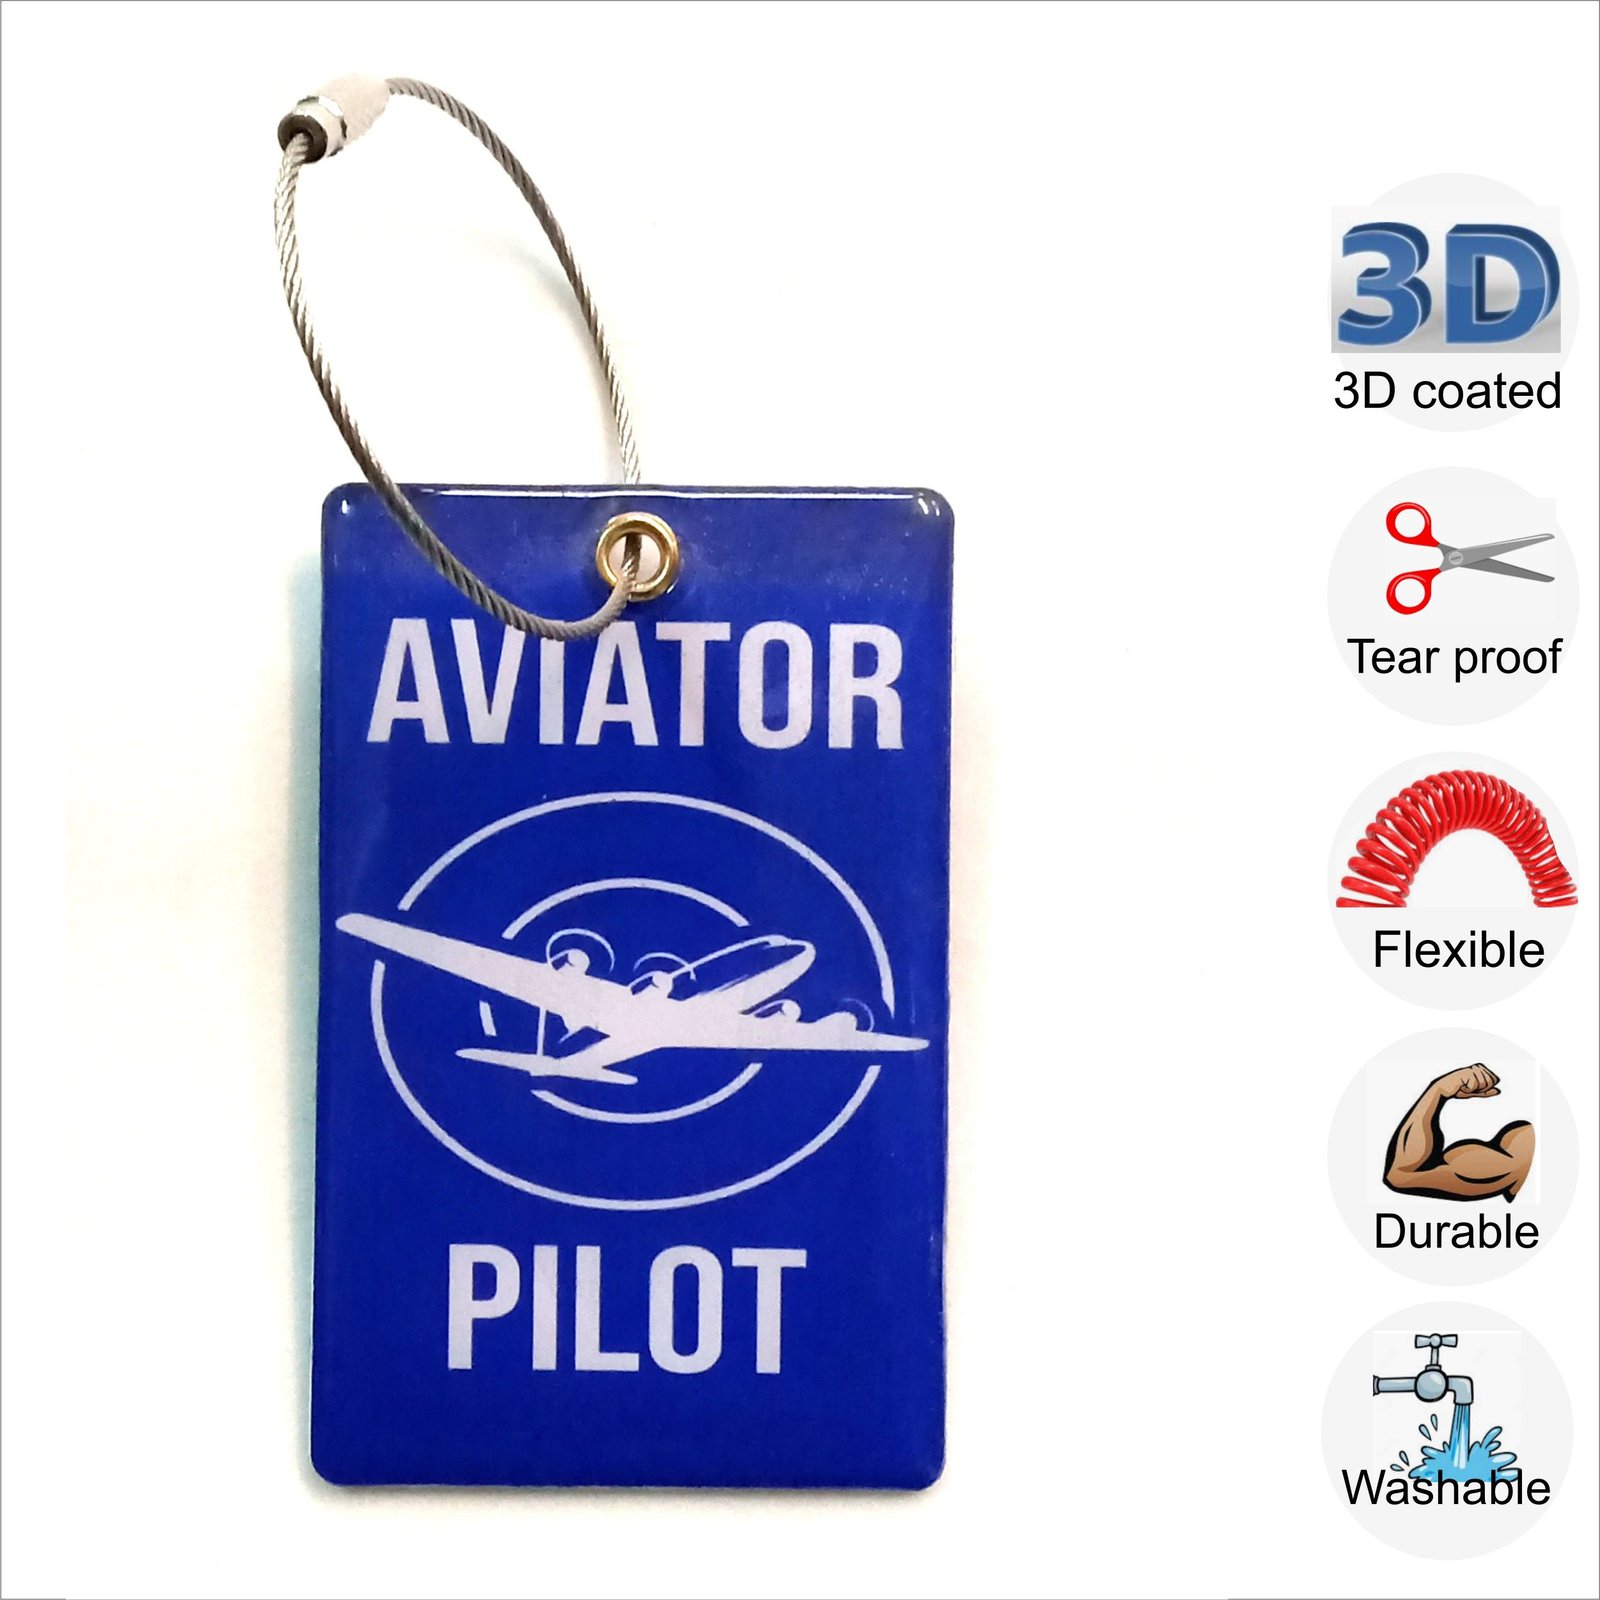 Aviator pilot blue 3D flexible bag tags with steel tie for crew and ...